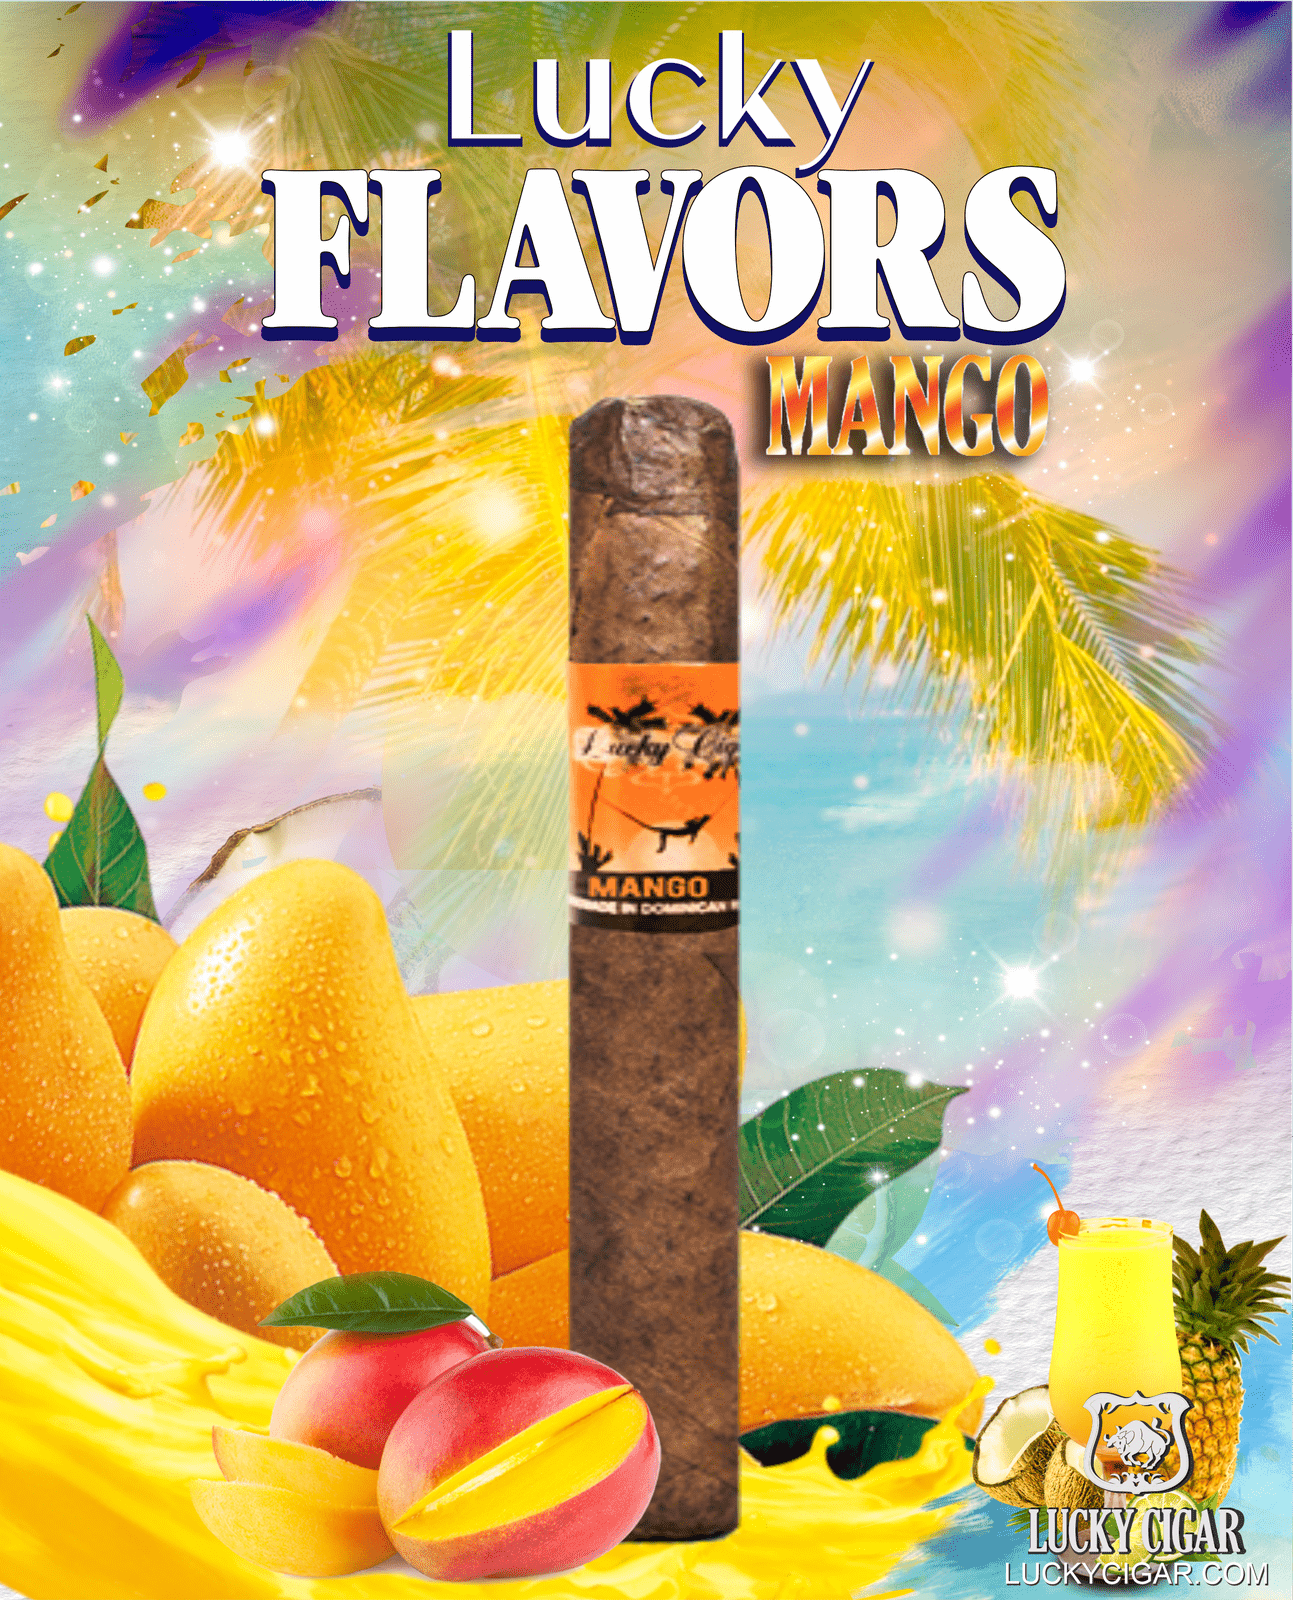 Flavored Cigars: Lucky Flavors Mango 5x42 Cigar